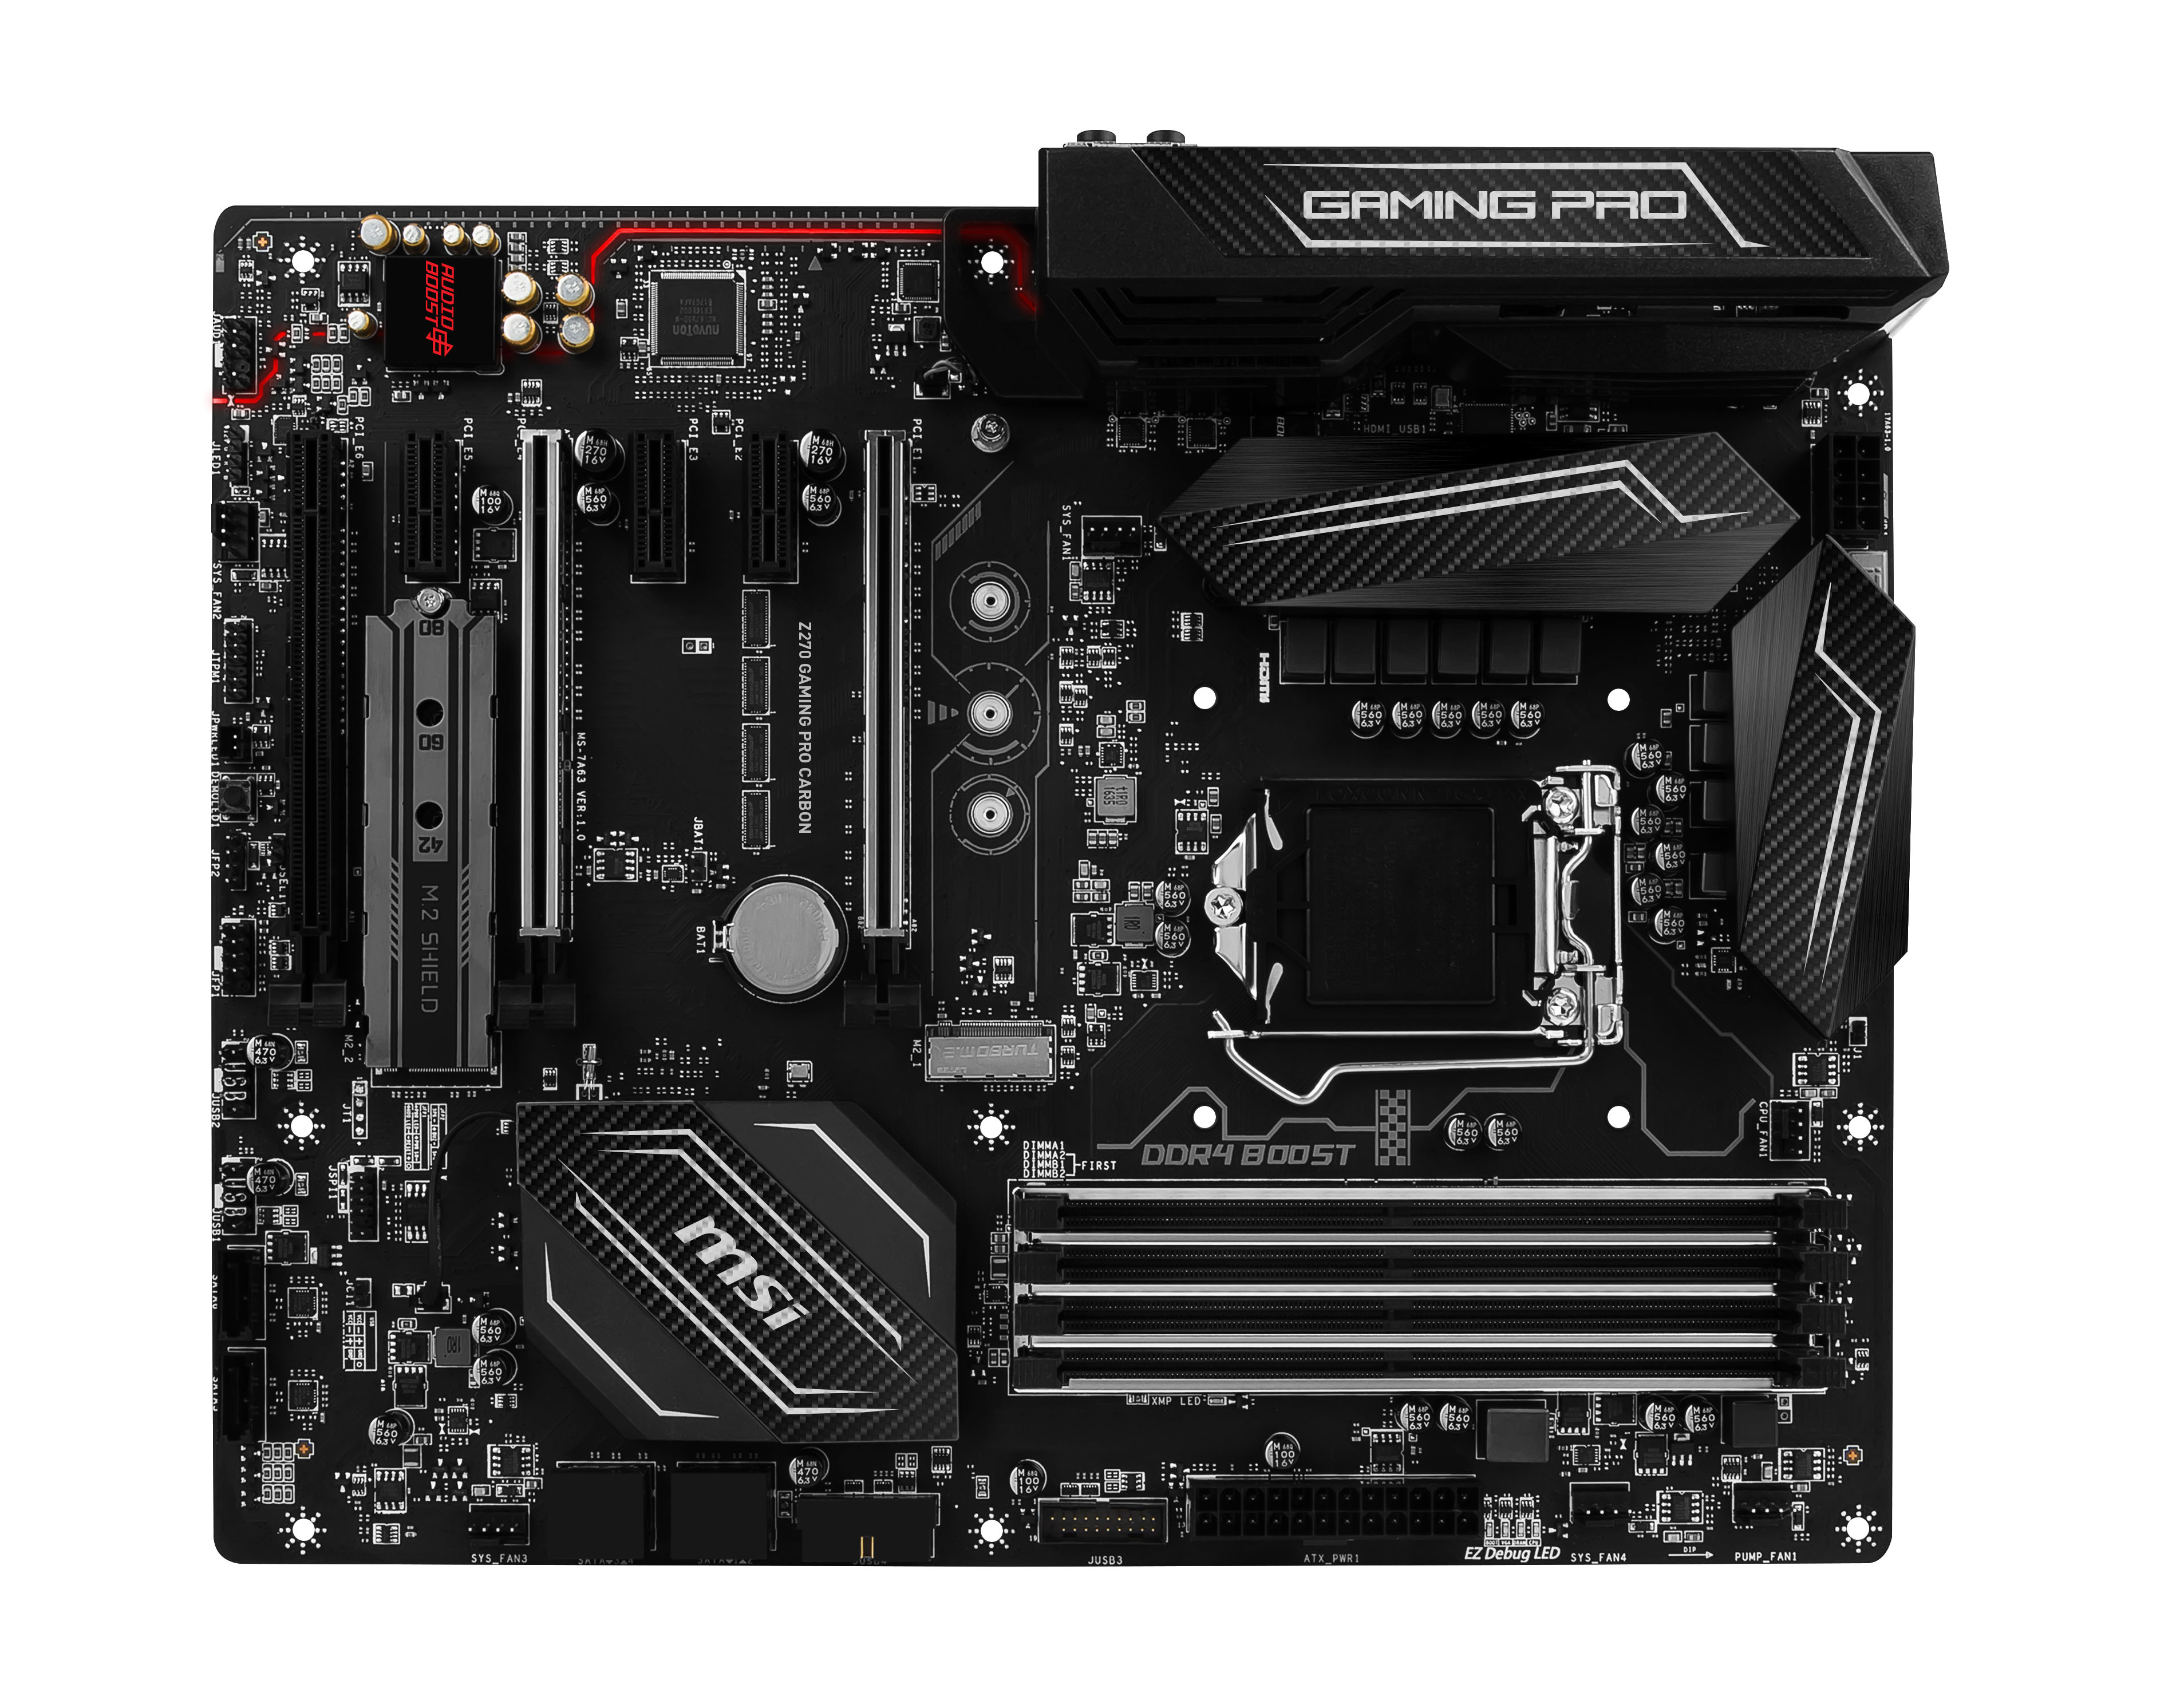 The Z270 GAMING PRO CARBON motherboard